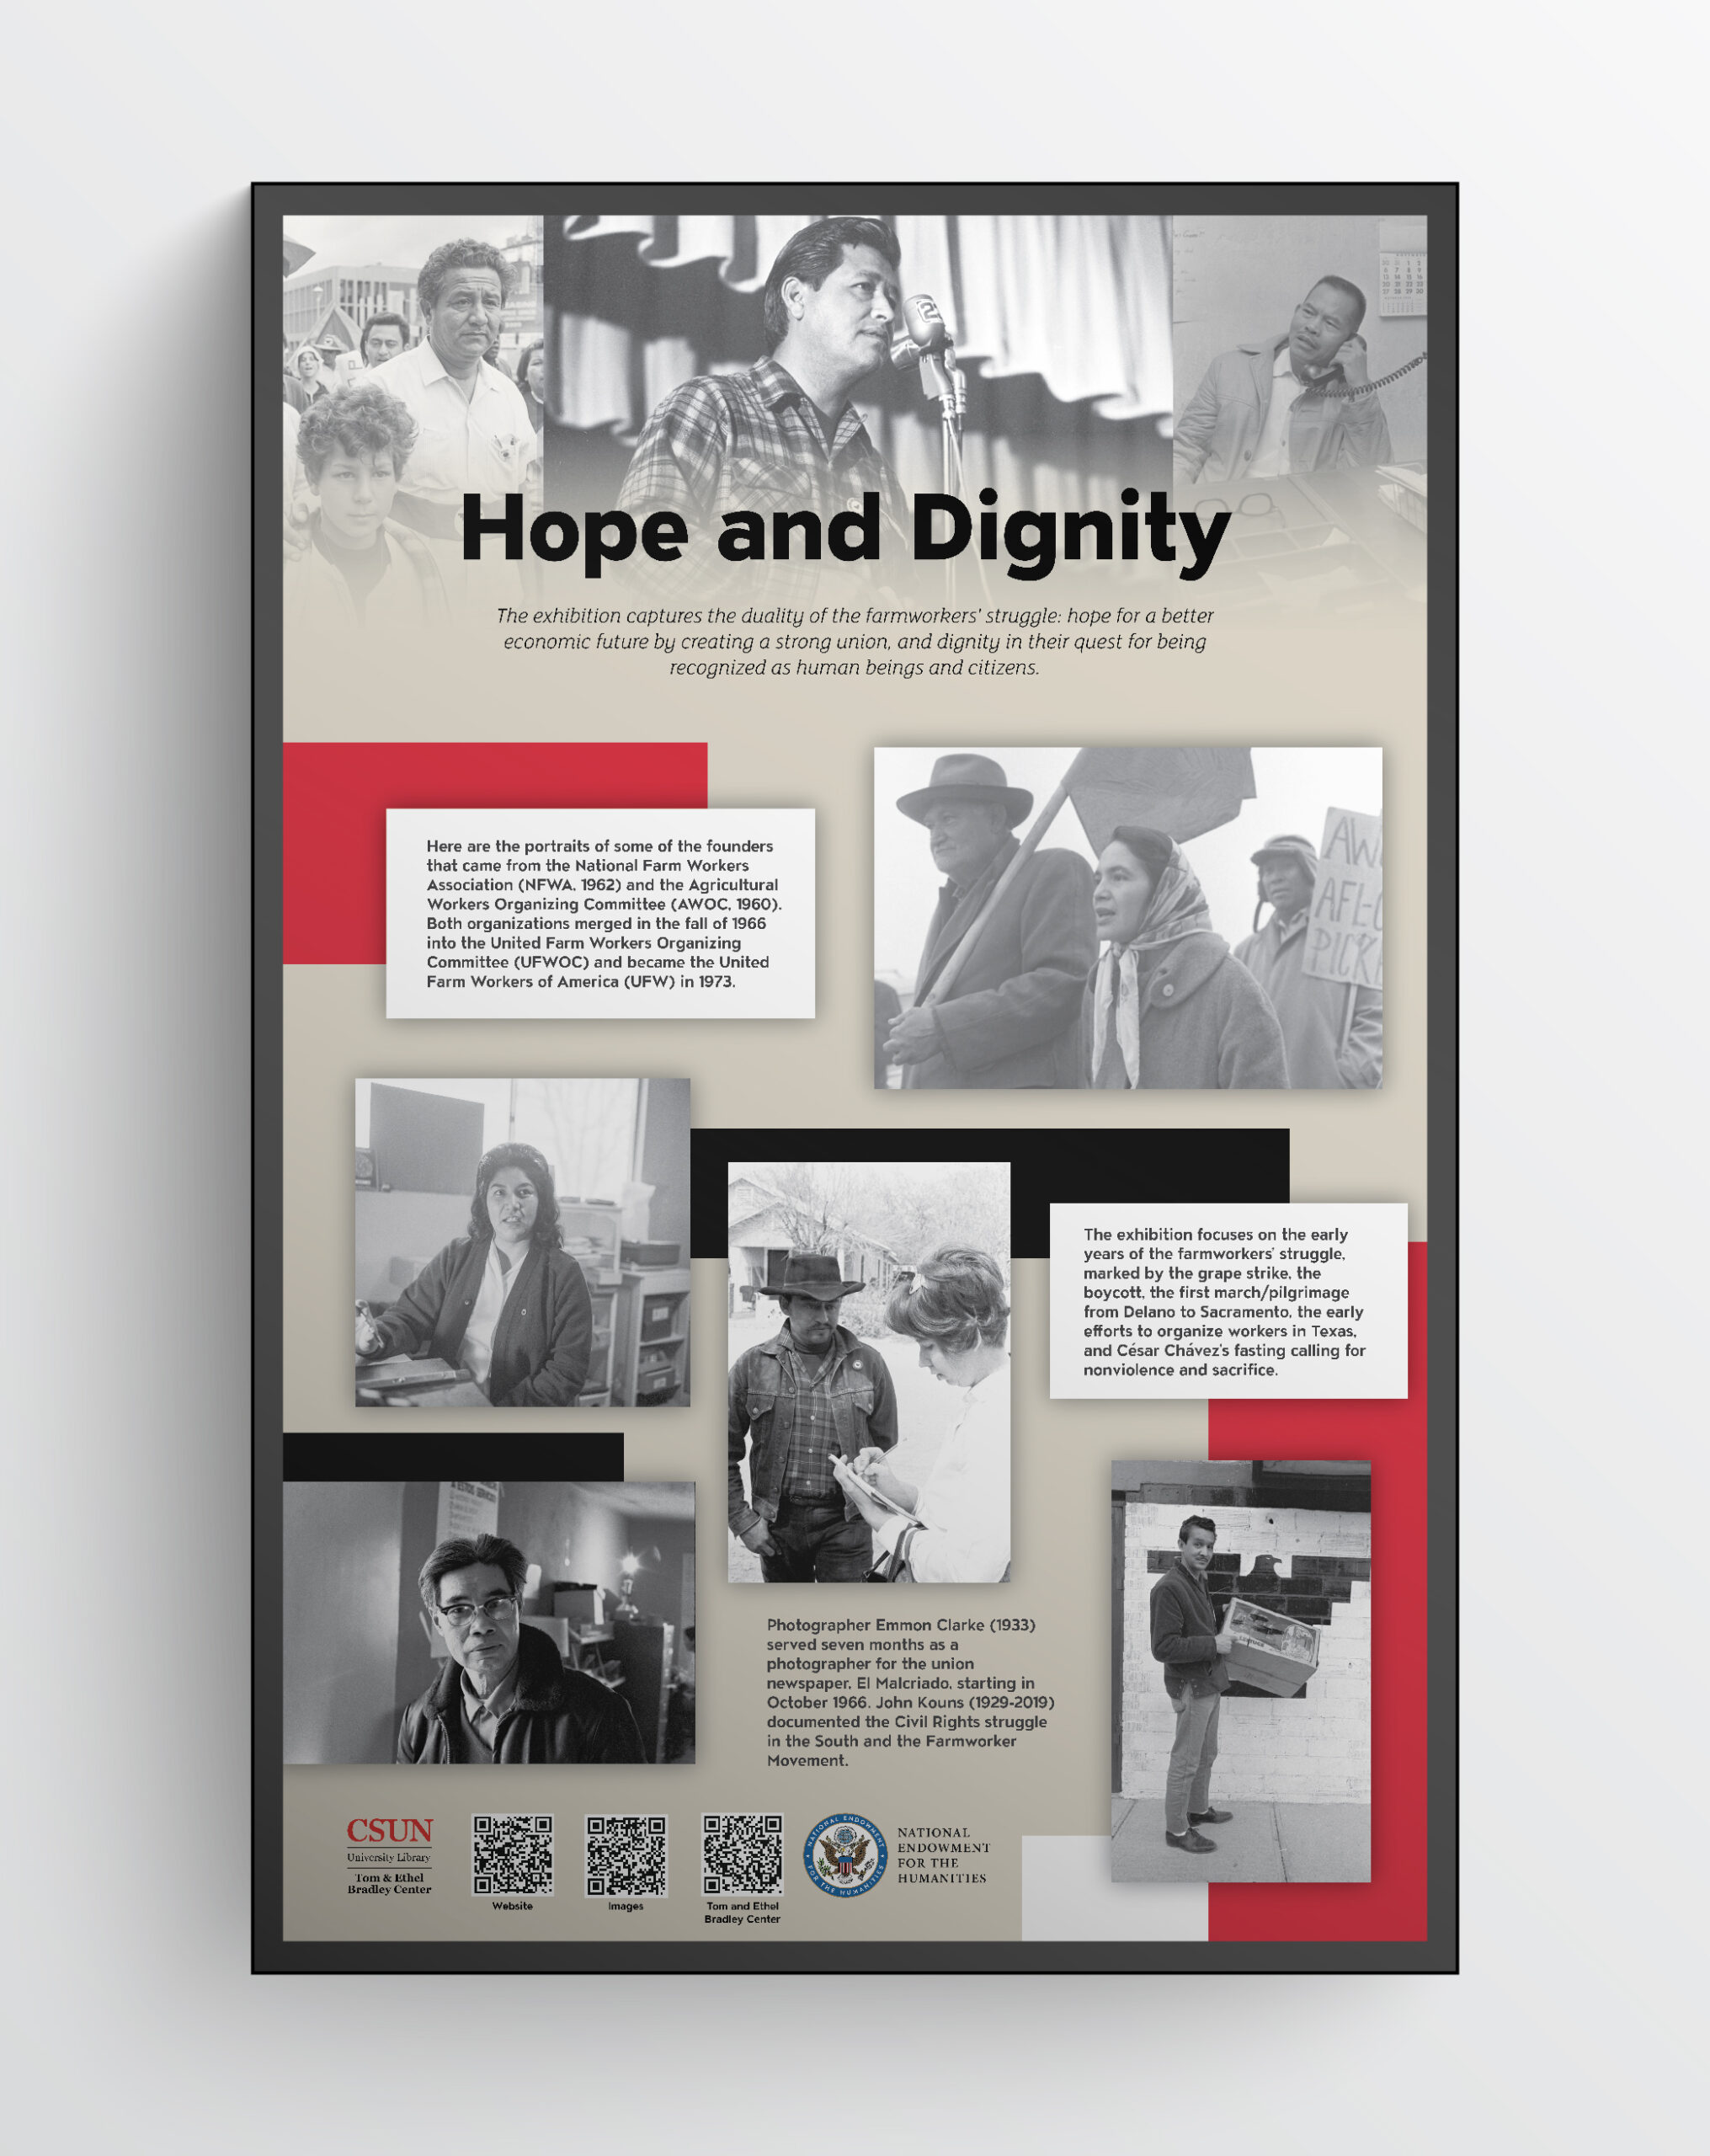 Introductory panel: Hope and Dignity.